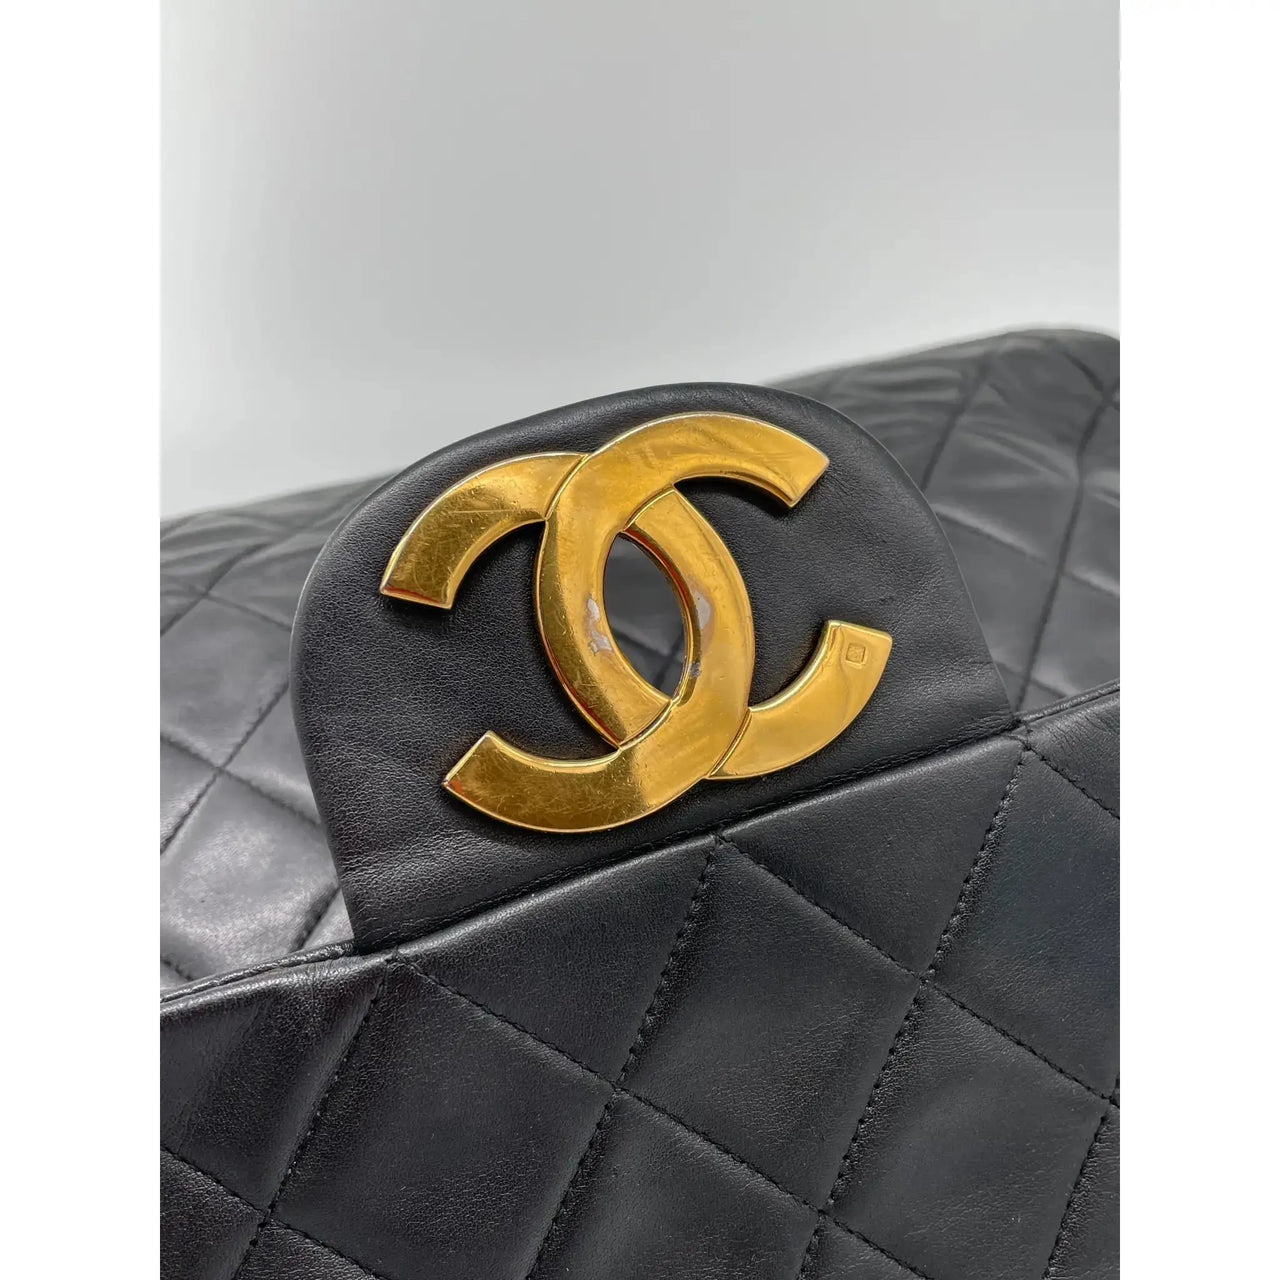 VINTAGE CHANEL HANDBAG CC CLASP IN QUILTED LEATHER PURSE PURSE